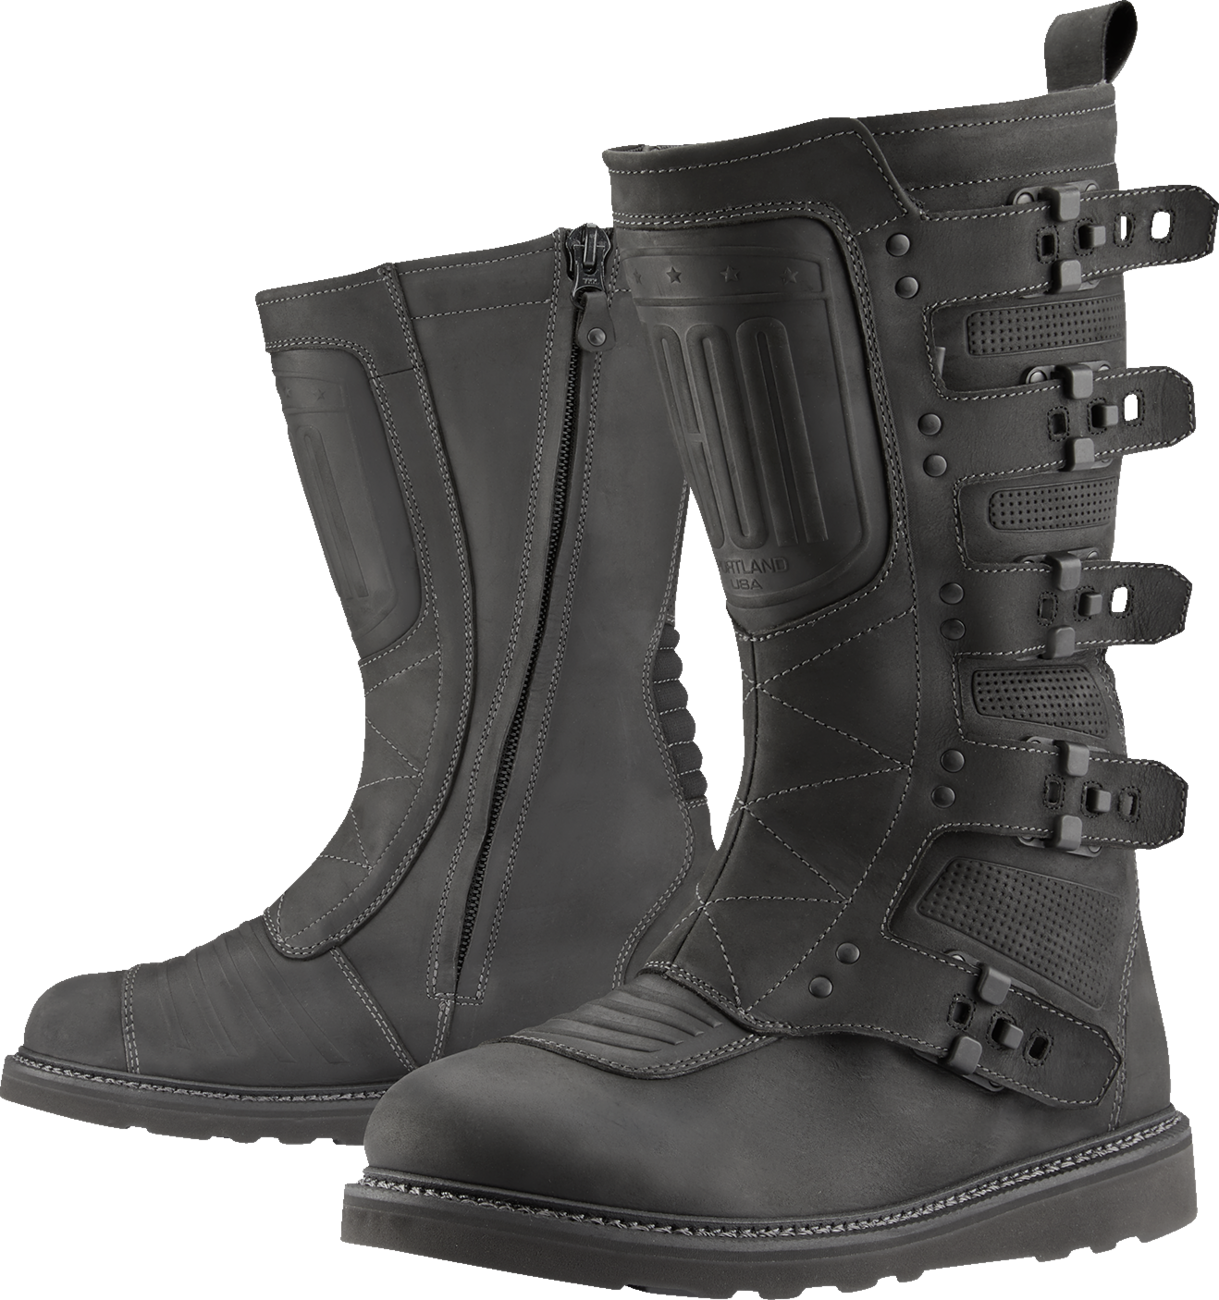 ICON Elsinore 2™ CE Boots - Black - Size 8 3403-1209